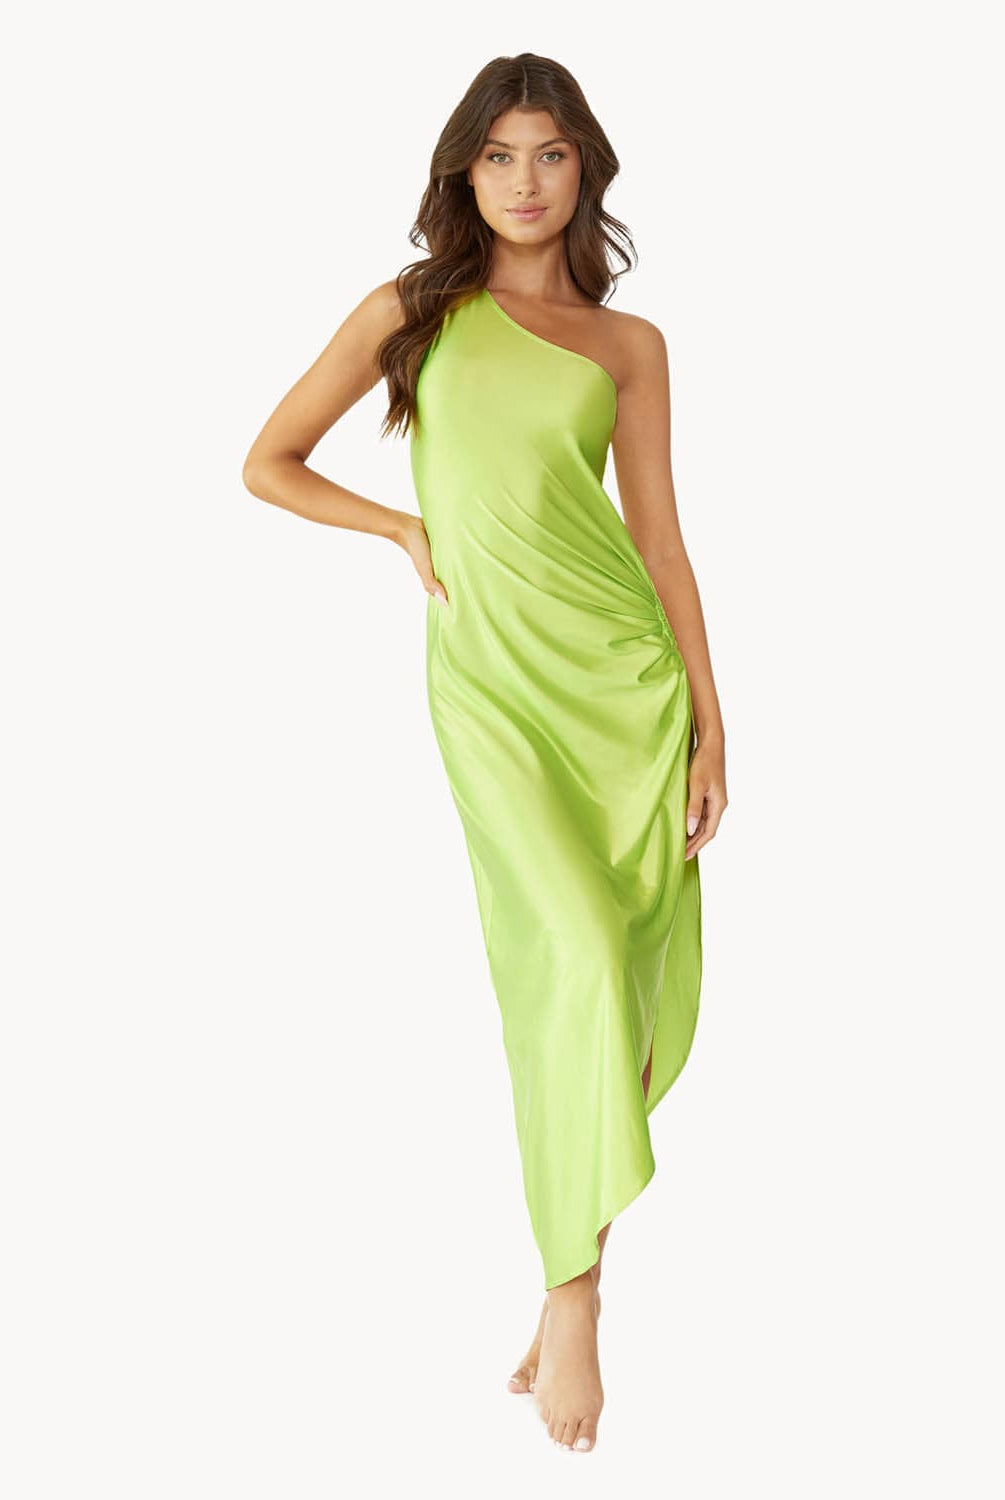 Brunette woman wearing a lime green one-shoulder dress with side slit and ring detail stands in front of white wall.